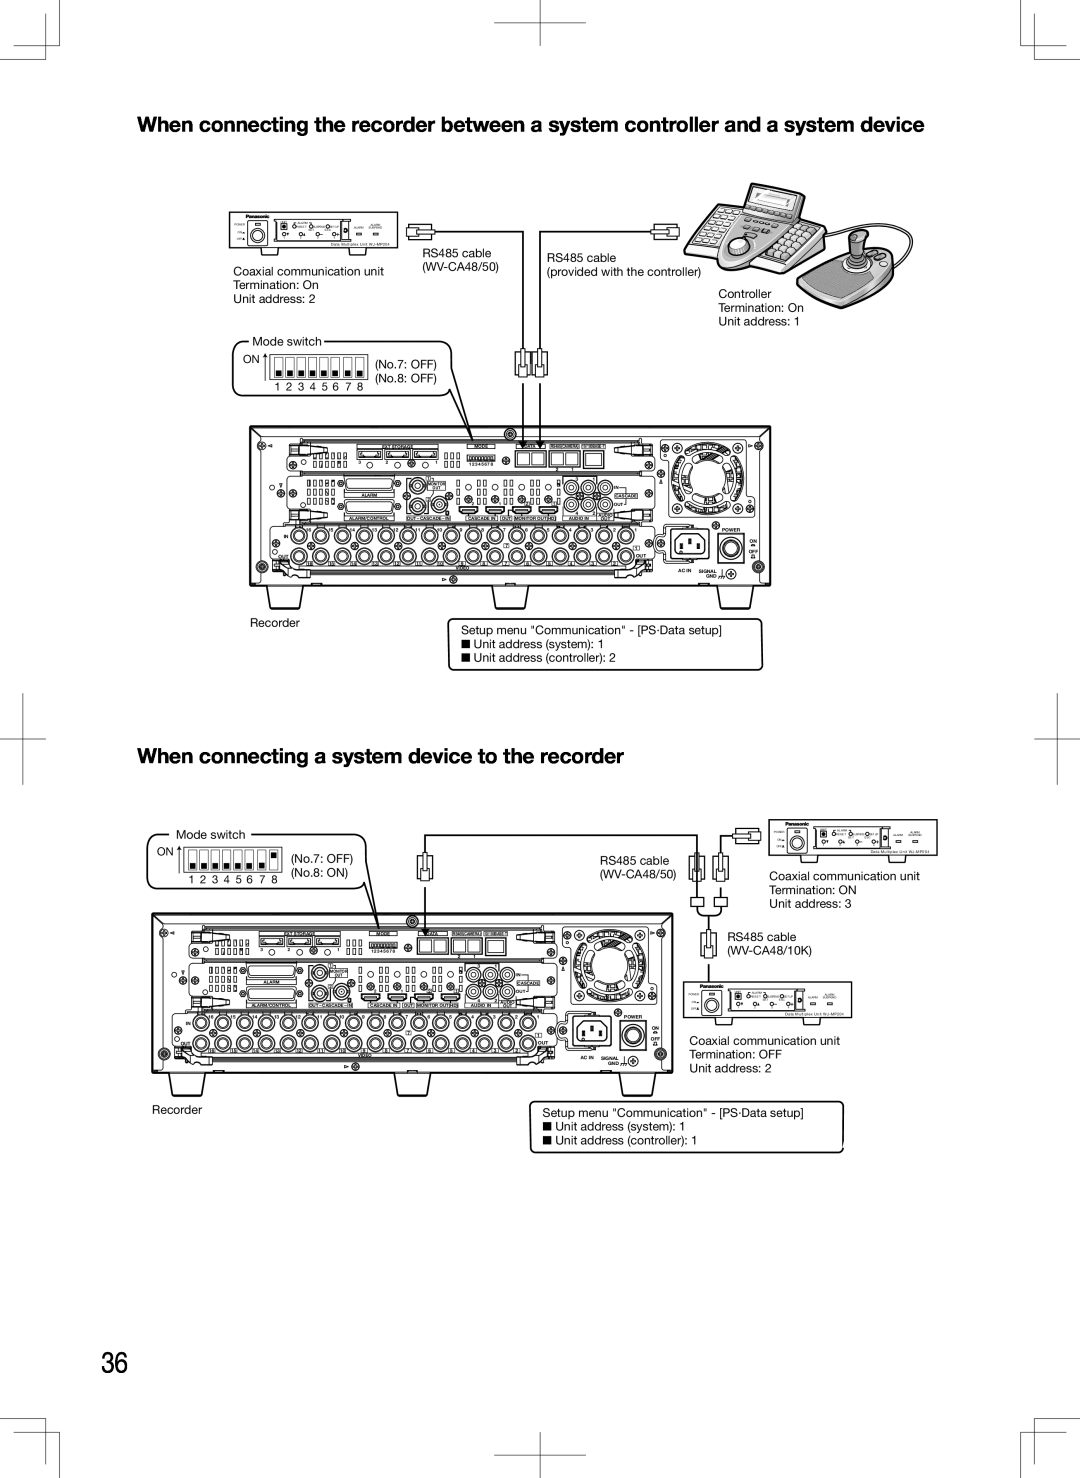 Panasonic WJ-HD716K, WJ-HD616K manual When connecting a system device to the recorder, No.7: OFF, No.8 OFF 